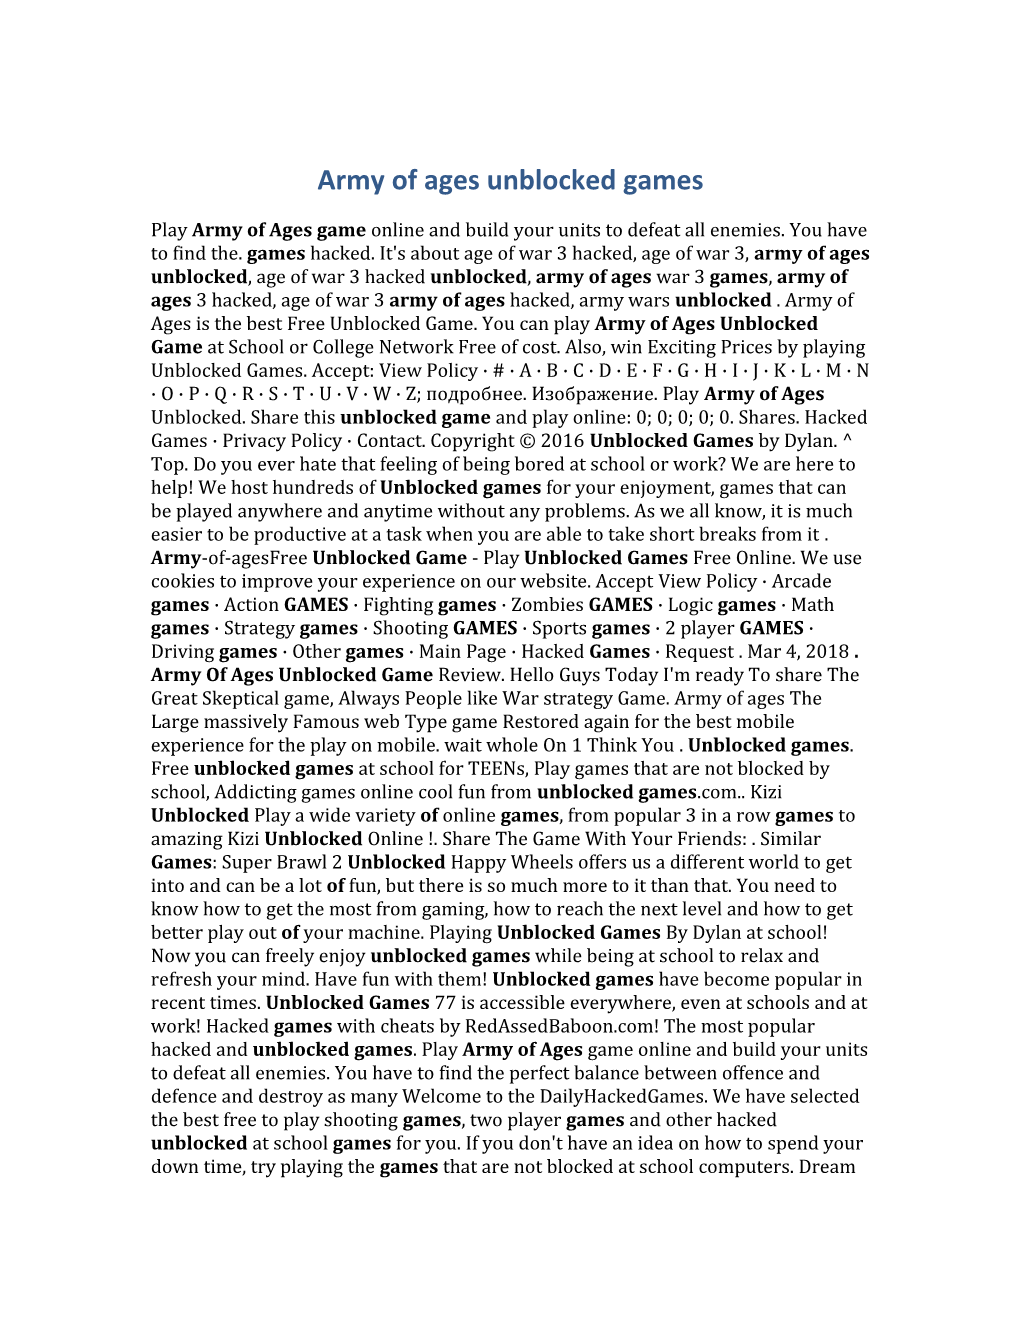 Army of Ages Unblocked Games